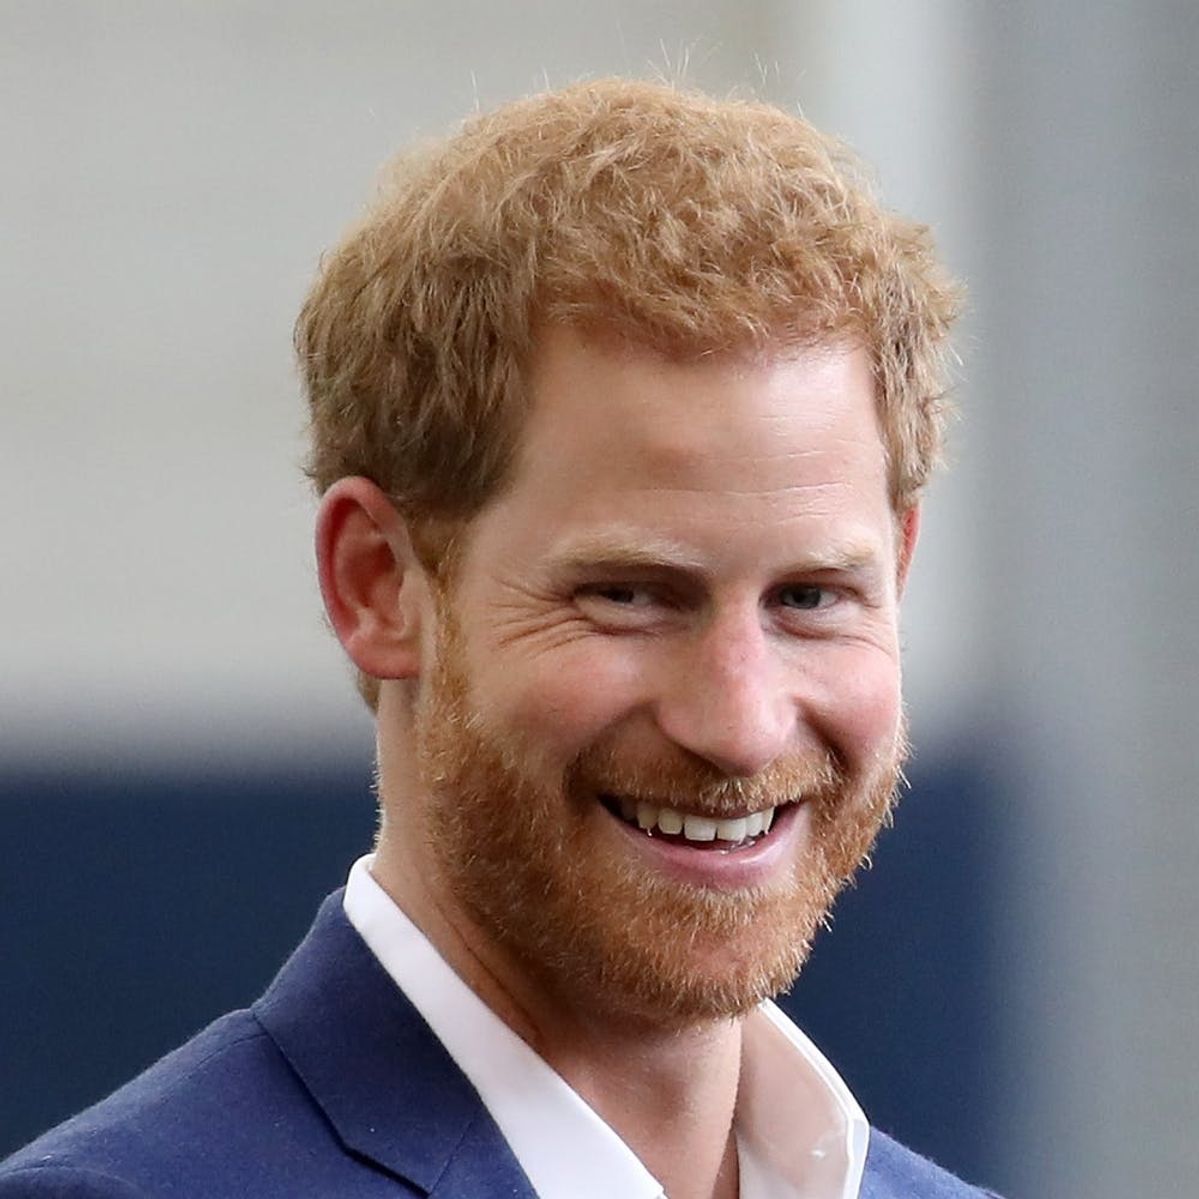 People Are Disappointed With Prince Harry Over His Beard